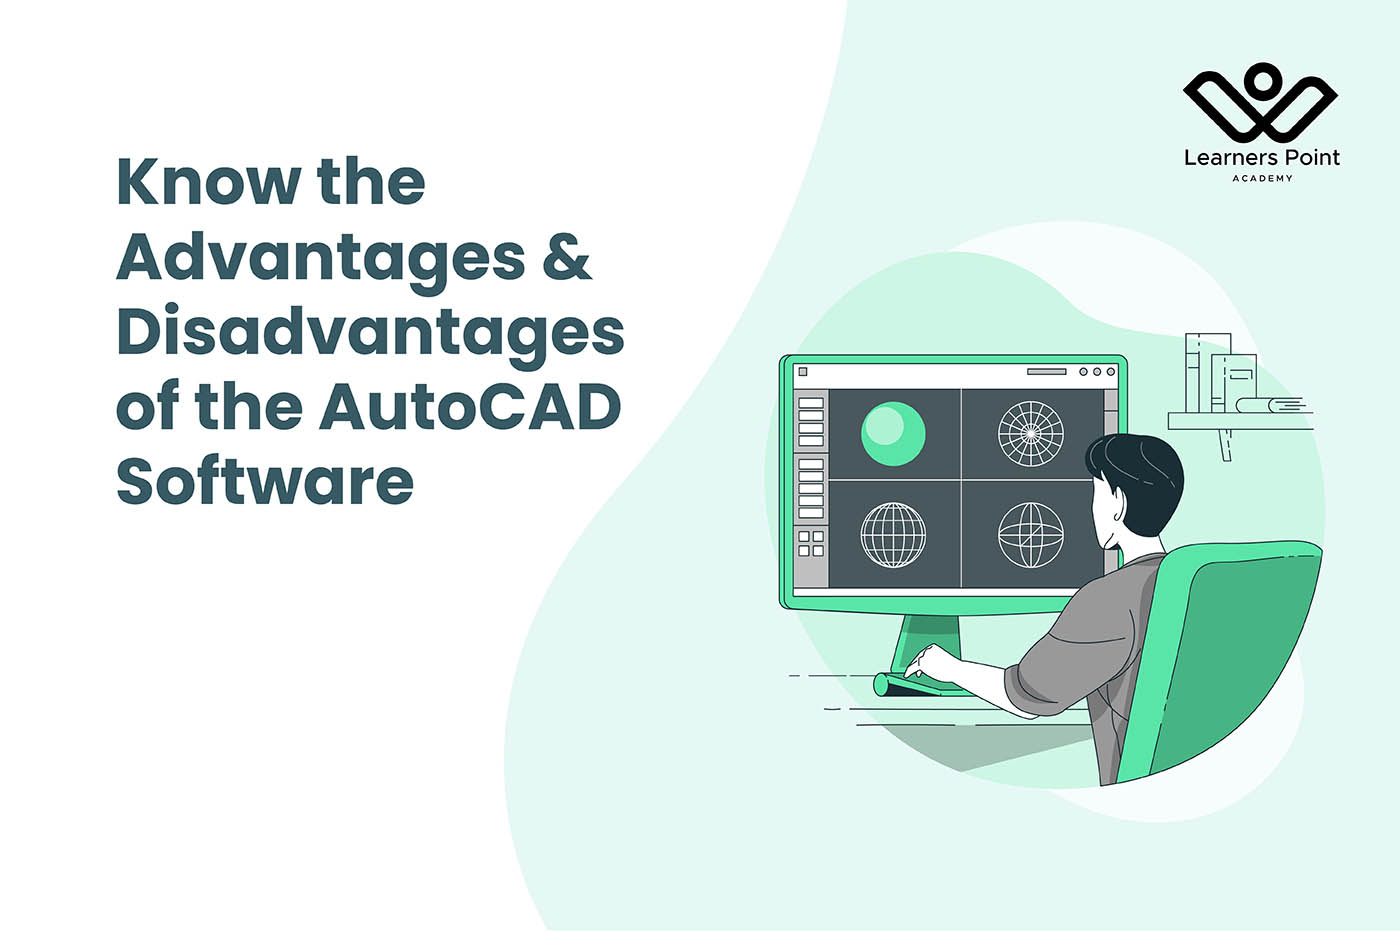 Know the Advantages & Disadvantages of the AutoCAD Software